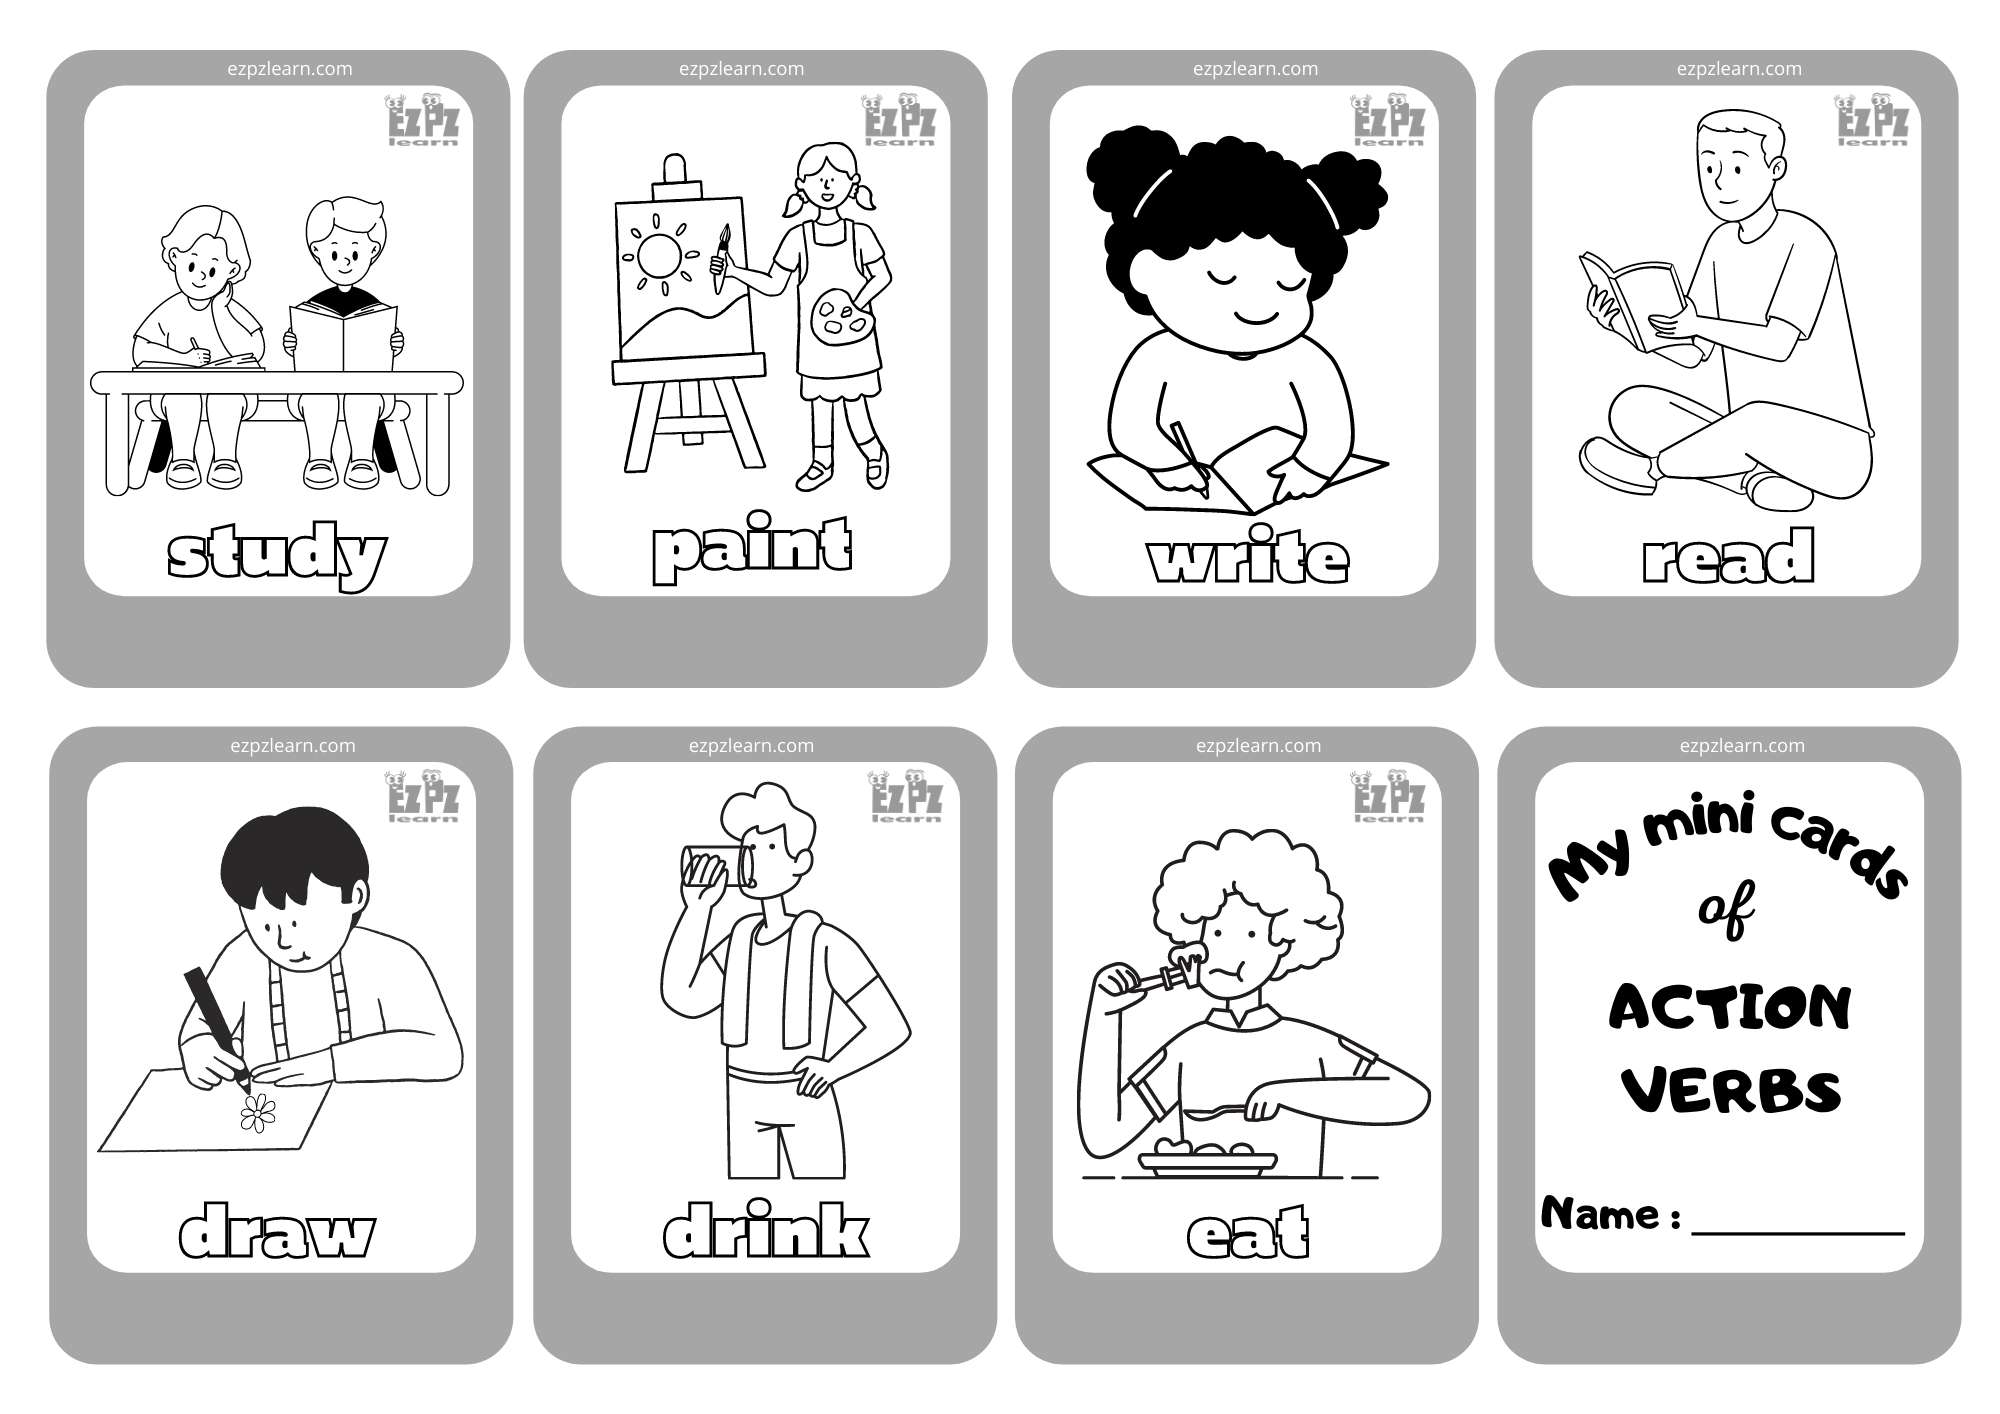 action-verbs-1-coloring-cards-free-pdf-download-ezpzlearn